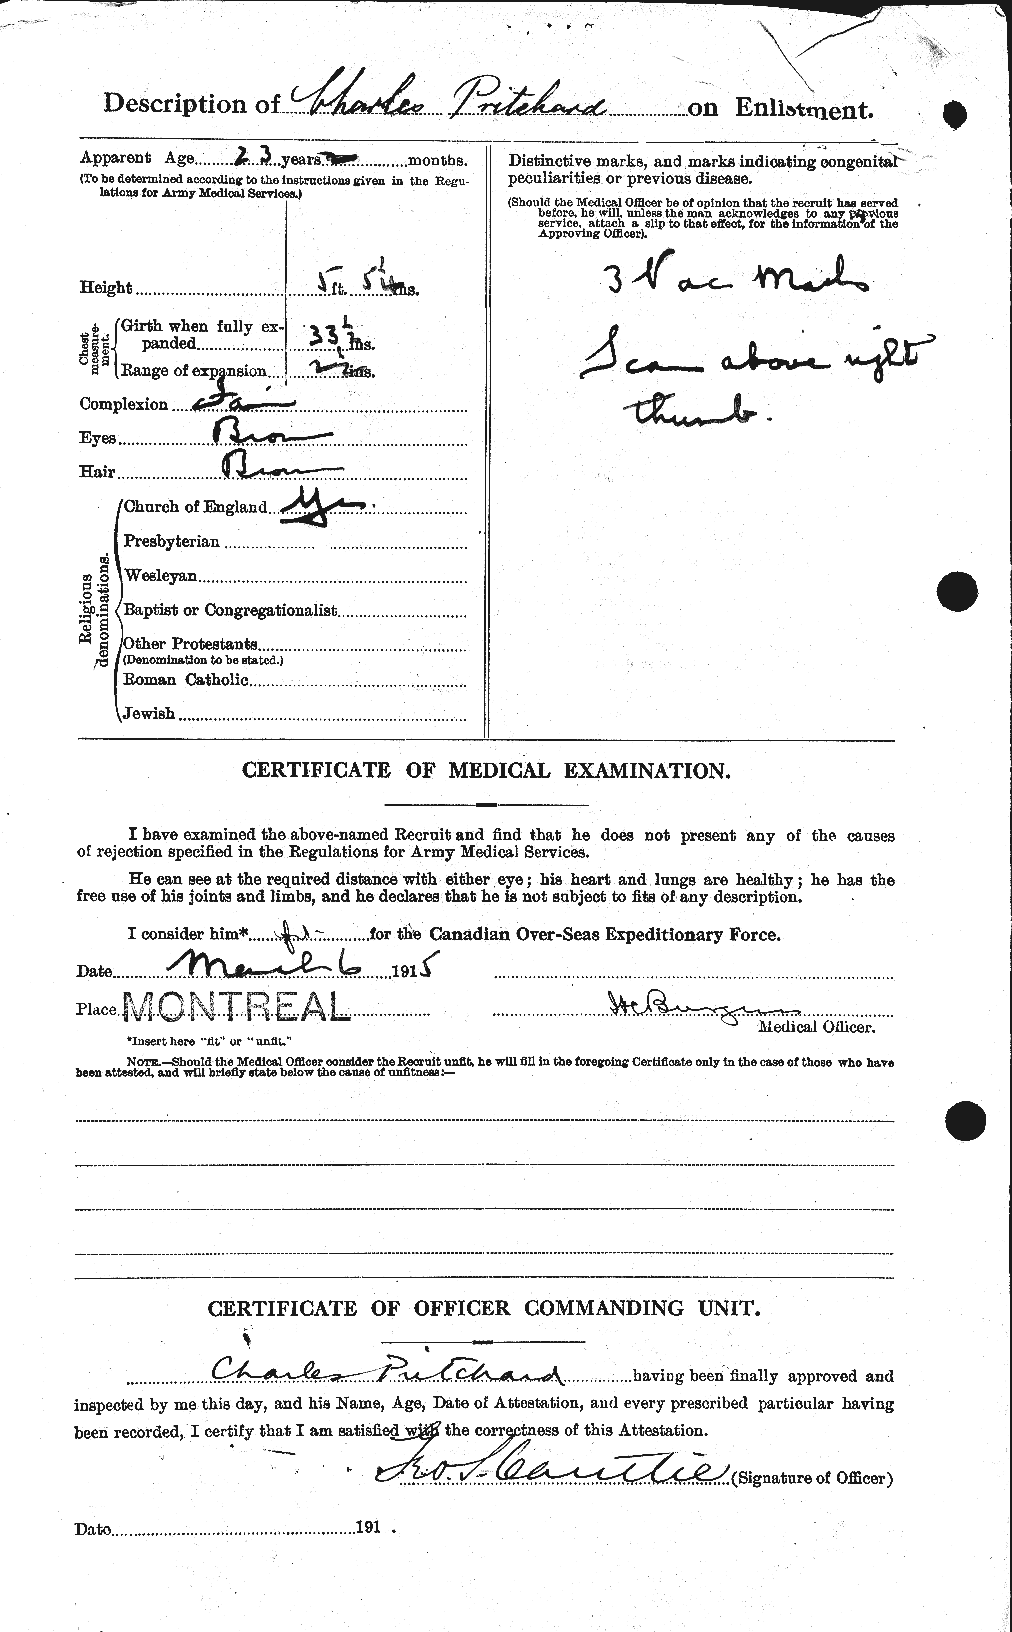 Personnel Records of the First World War - CEF 588492b